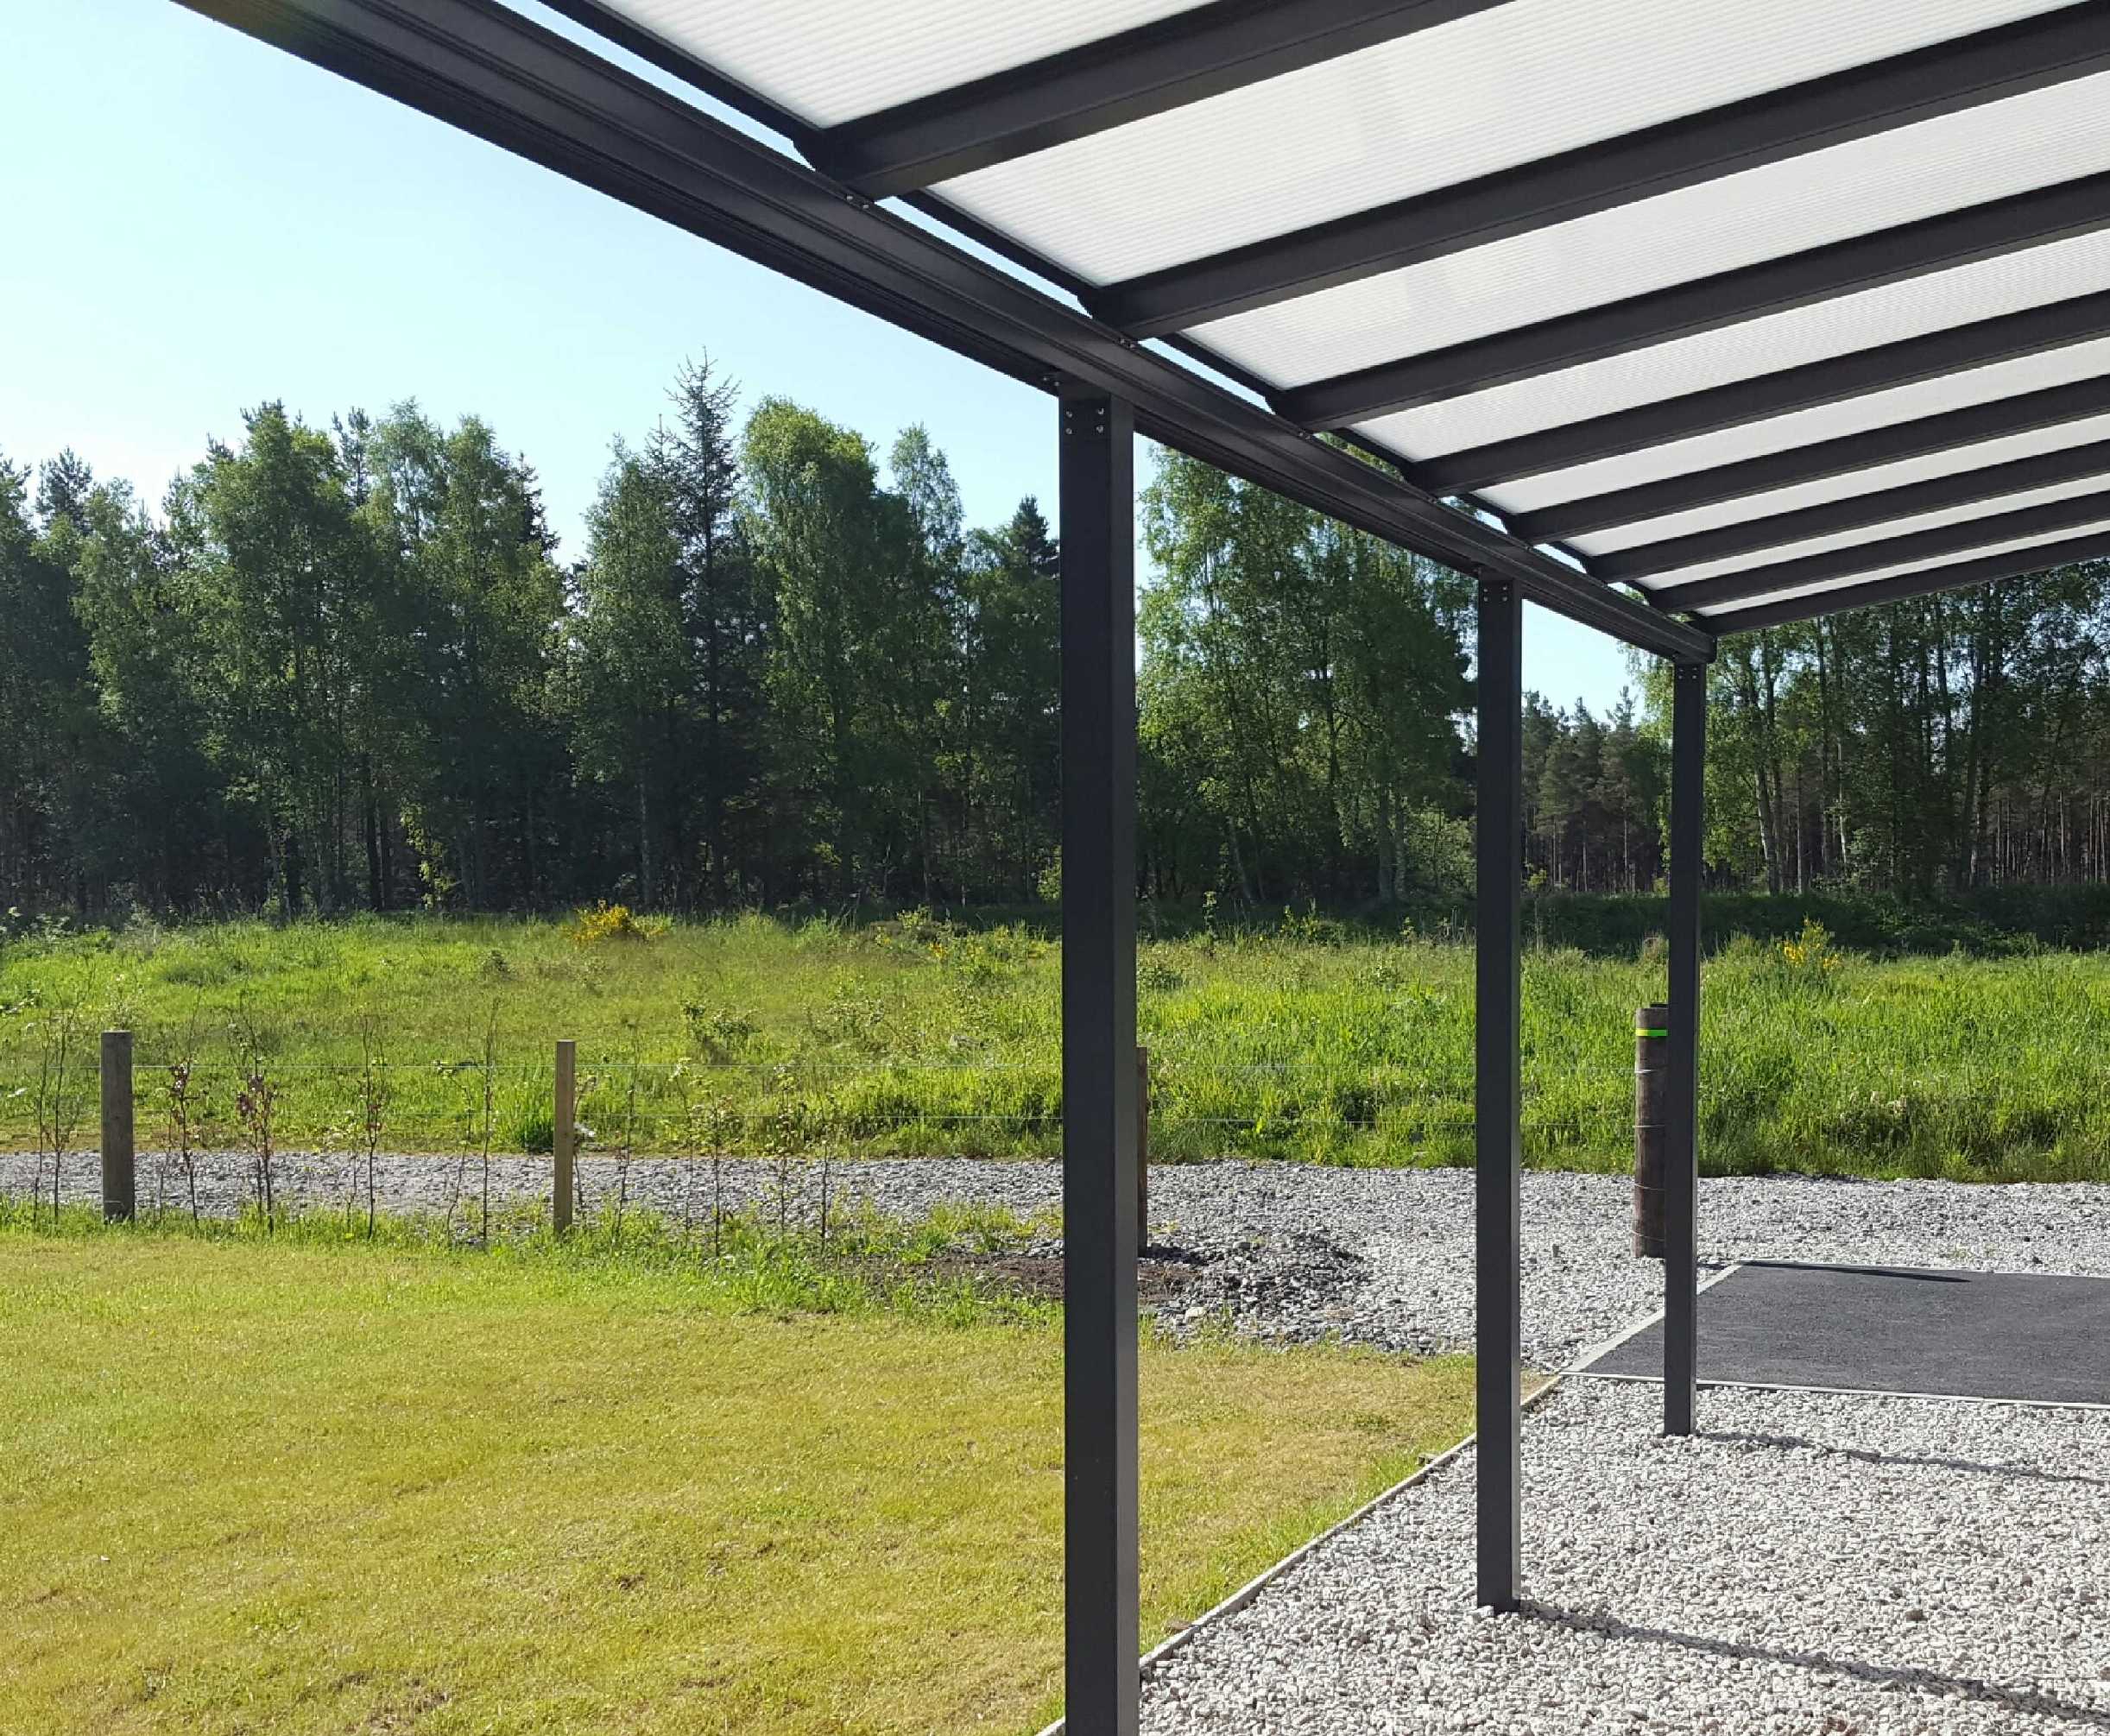 Omega Smart Lean-To Canopy, Anthracite Grey, 6mm Glass Clear Plate Polycarbonate Glazing - 5.6m (W) x 3.0m (P), (3) Supporting Posts